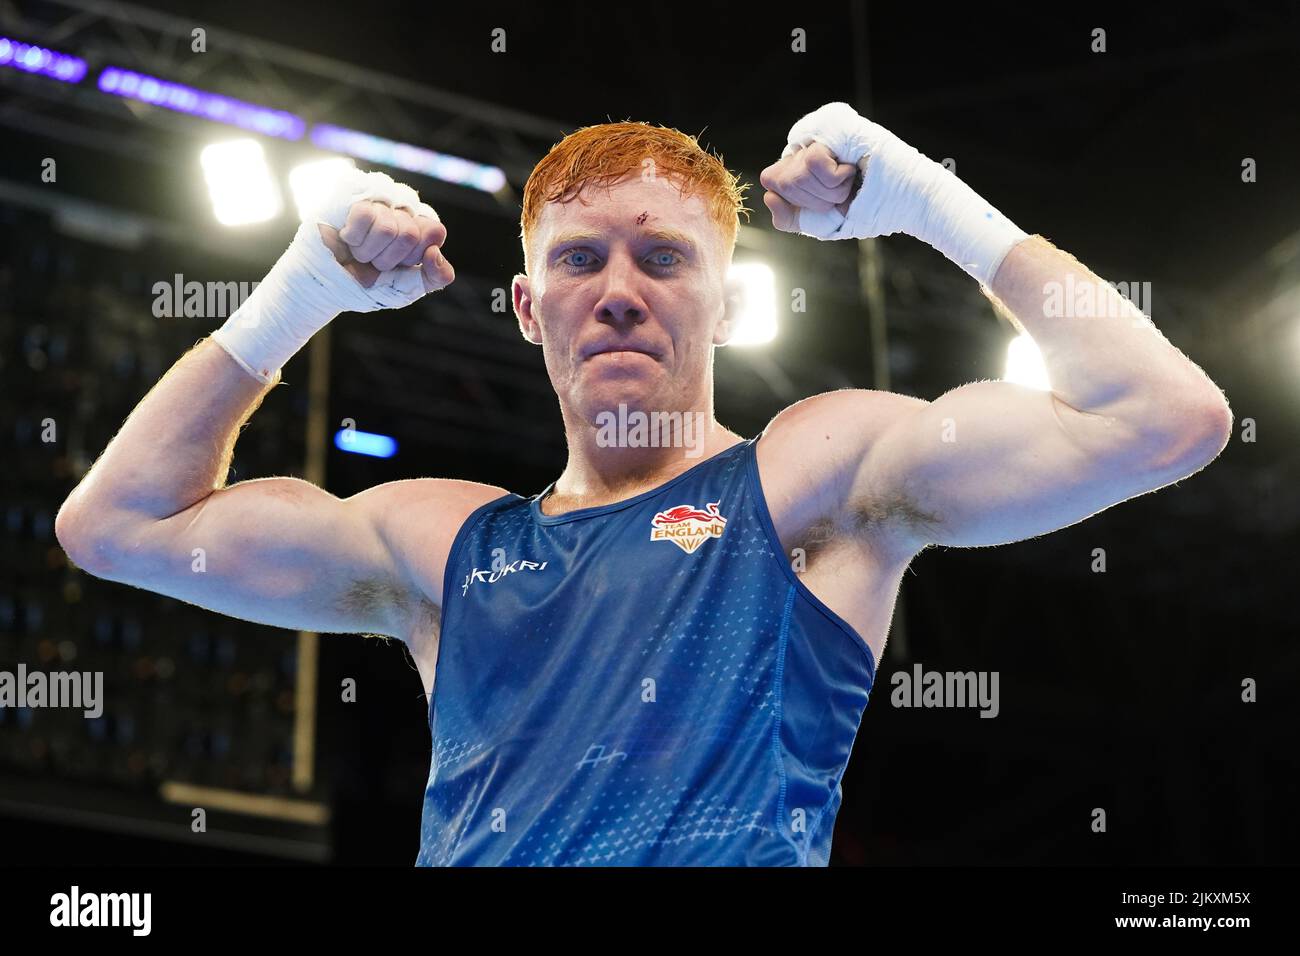 England's Aaron Bowen celebrates victory following the Men’s Over 75kg-80kg (Light Heavyweight) - Quarter-Final 3 at The NEC on day six of the 2022 Commonwealth Games in Birmingham. Picture date: Wednesday August 3, 2022. Stock Photo